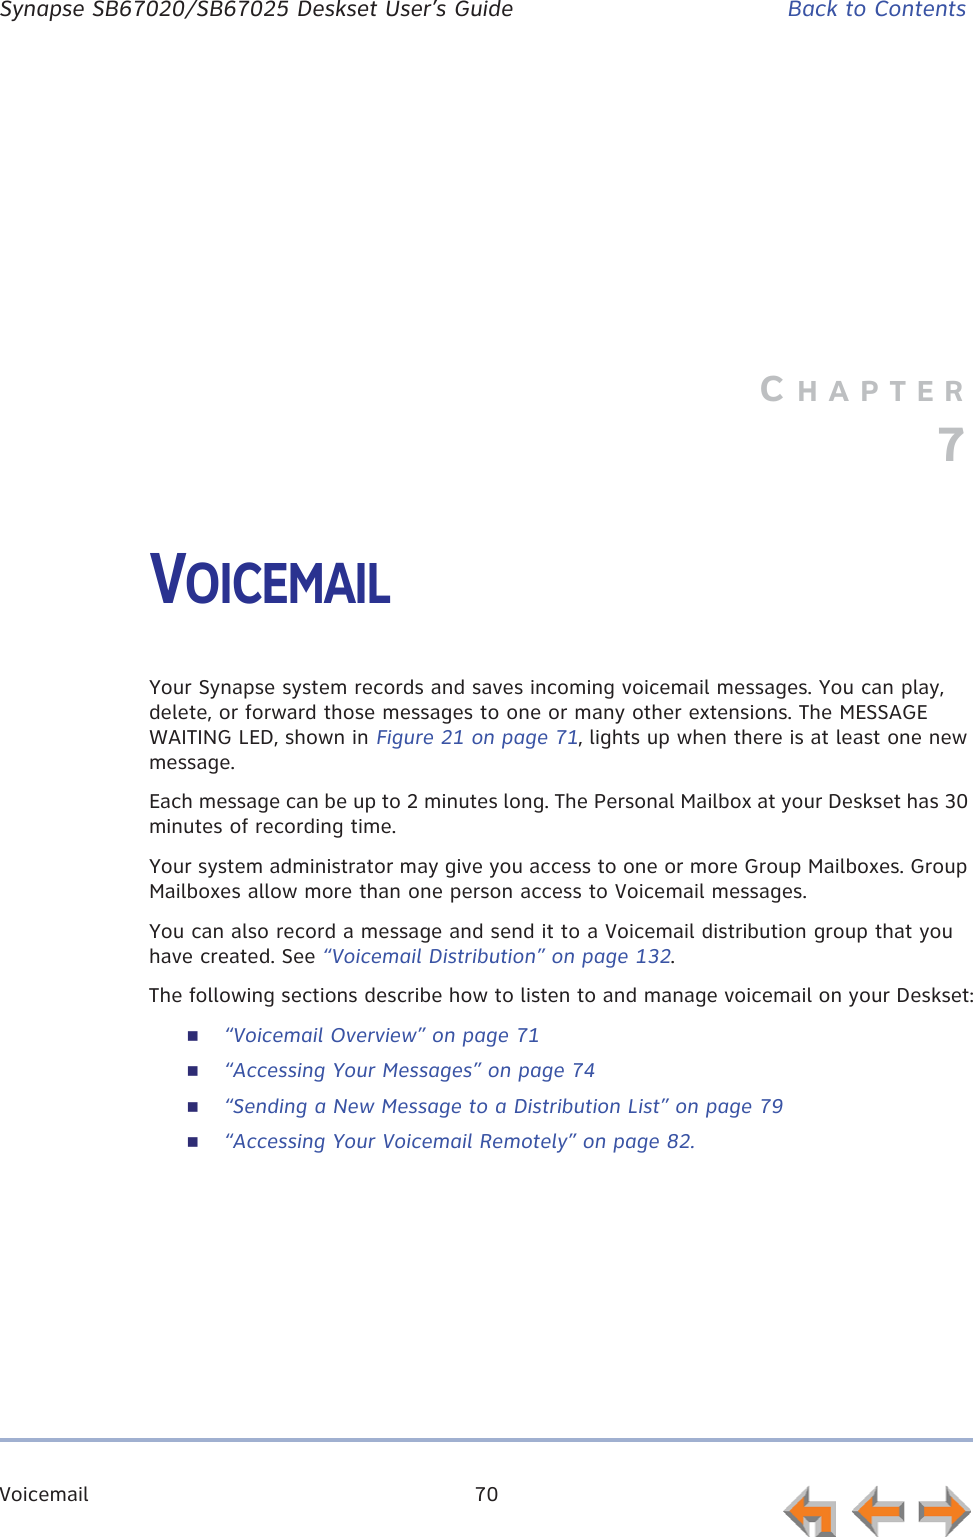 Voicemail 70      Synapse SB67020/SB67025 Deskset User’s Guide Back to ContentsCHAPTER7VOICEMAILYour Synapse system records and saves incoming voicemail messages. You can play, delete, or forward those messages to one or many other extensions. The MESSAGE WAITING LED, shown in Figure 21 on page 71, lights up when there is at least one new message.Each message can be up to 2 minutes long. The Personal Mailbox at your Deskset has 30 minutes of recording time.Your system administrator may give you access to one or more Group Mailboxes. Group Mailboxes allow more than one person access to Voicemail messages.You can also record a message and send it to a Voicemail distribution group that you have created. See “Voicemail Distribution” on page 132.The following sections describe how to listen to and manage voicemail on your Deskset:“Voicemail Overview” on page 71“Accessing Your Messages” on page 74“Sending a New Message to a Distribution List” on page 79“Accessing Your Voicemail Remotely” on page 82.